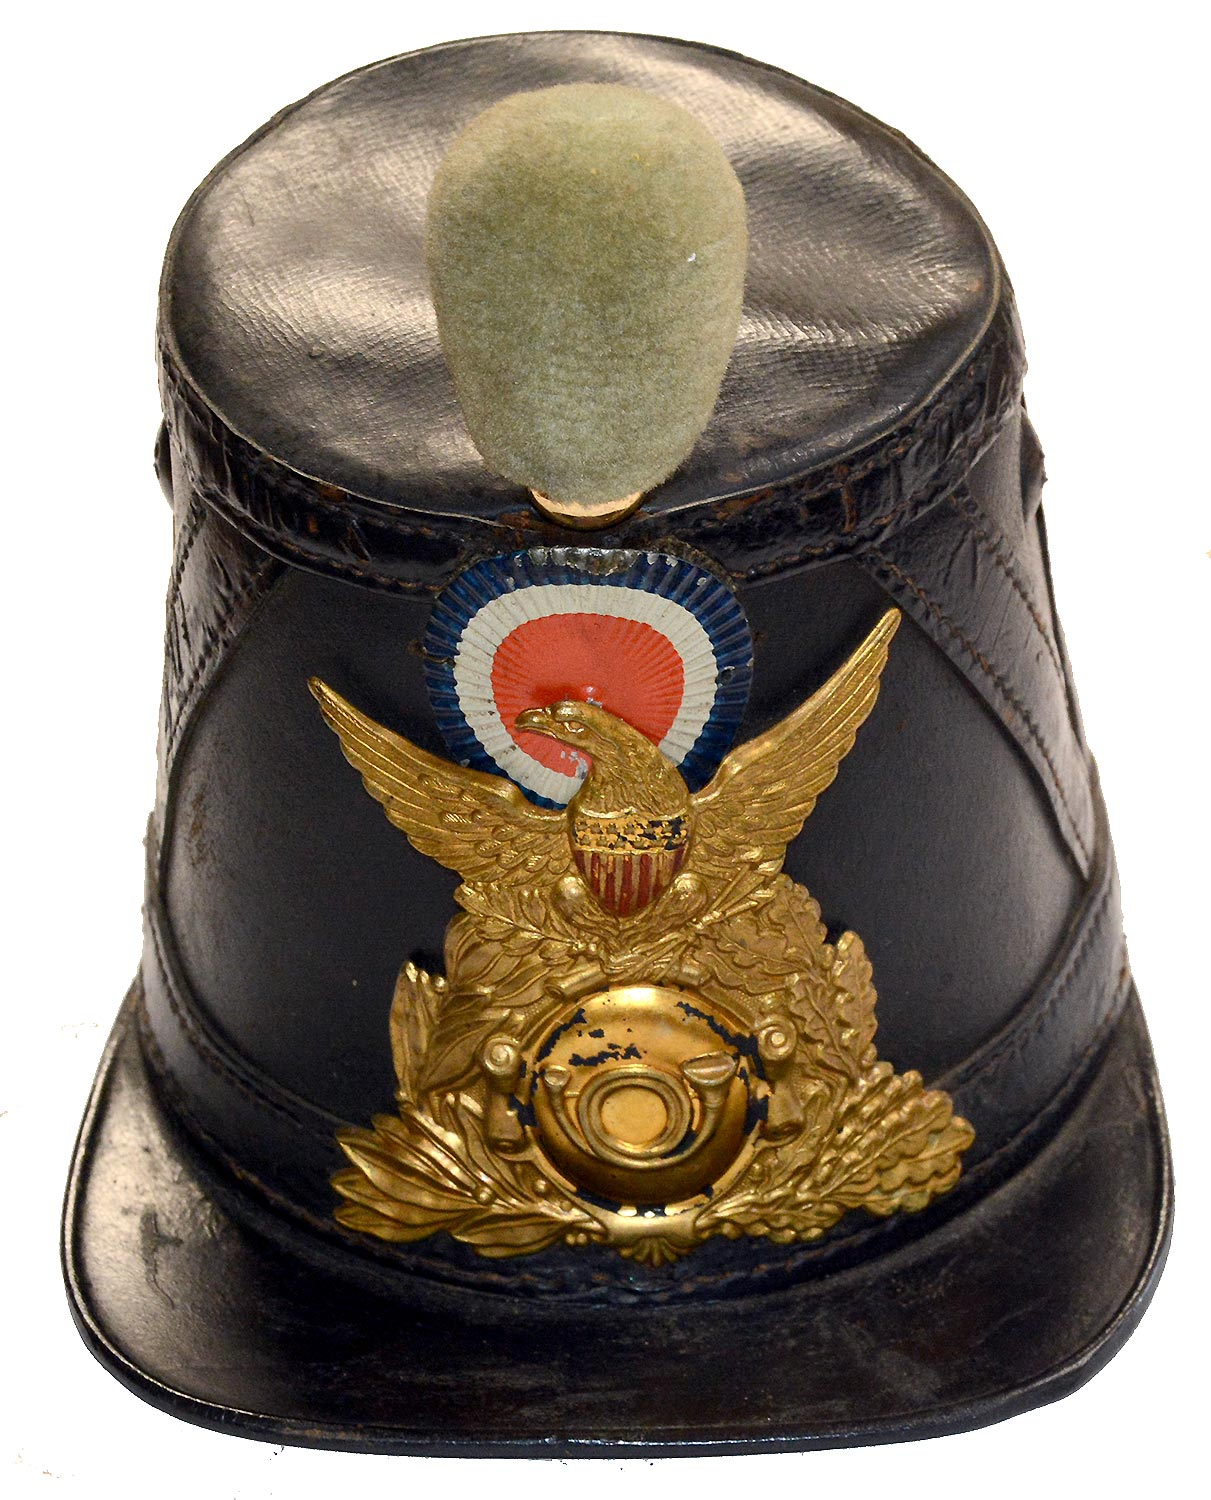 CIVIL WAR FEDERAL CHAUSSER’S ALL-LEATHER FRENCH-STYLE SHAKO IN GOOD ORIGINAL CONDITION